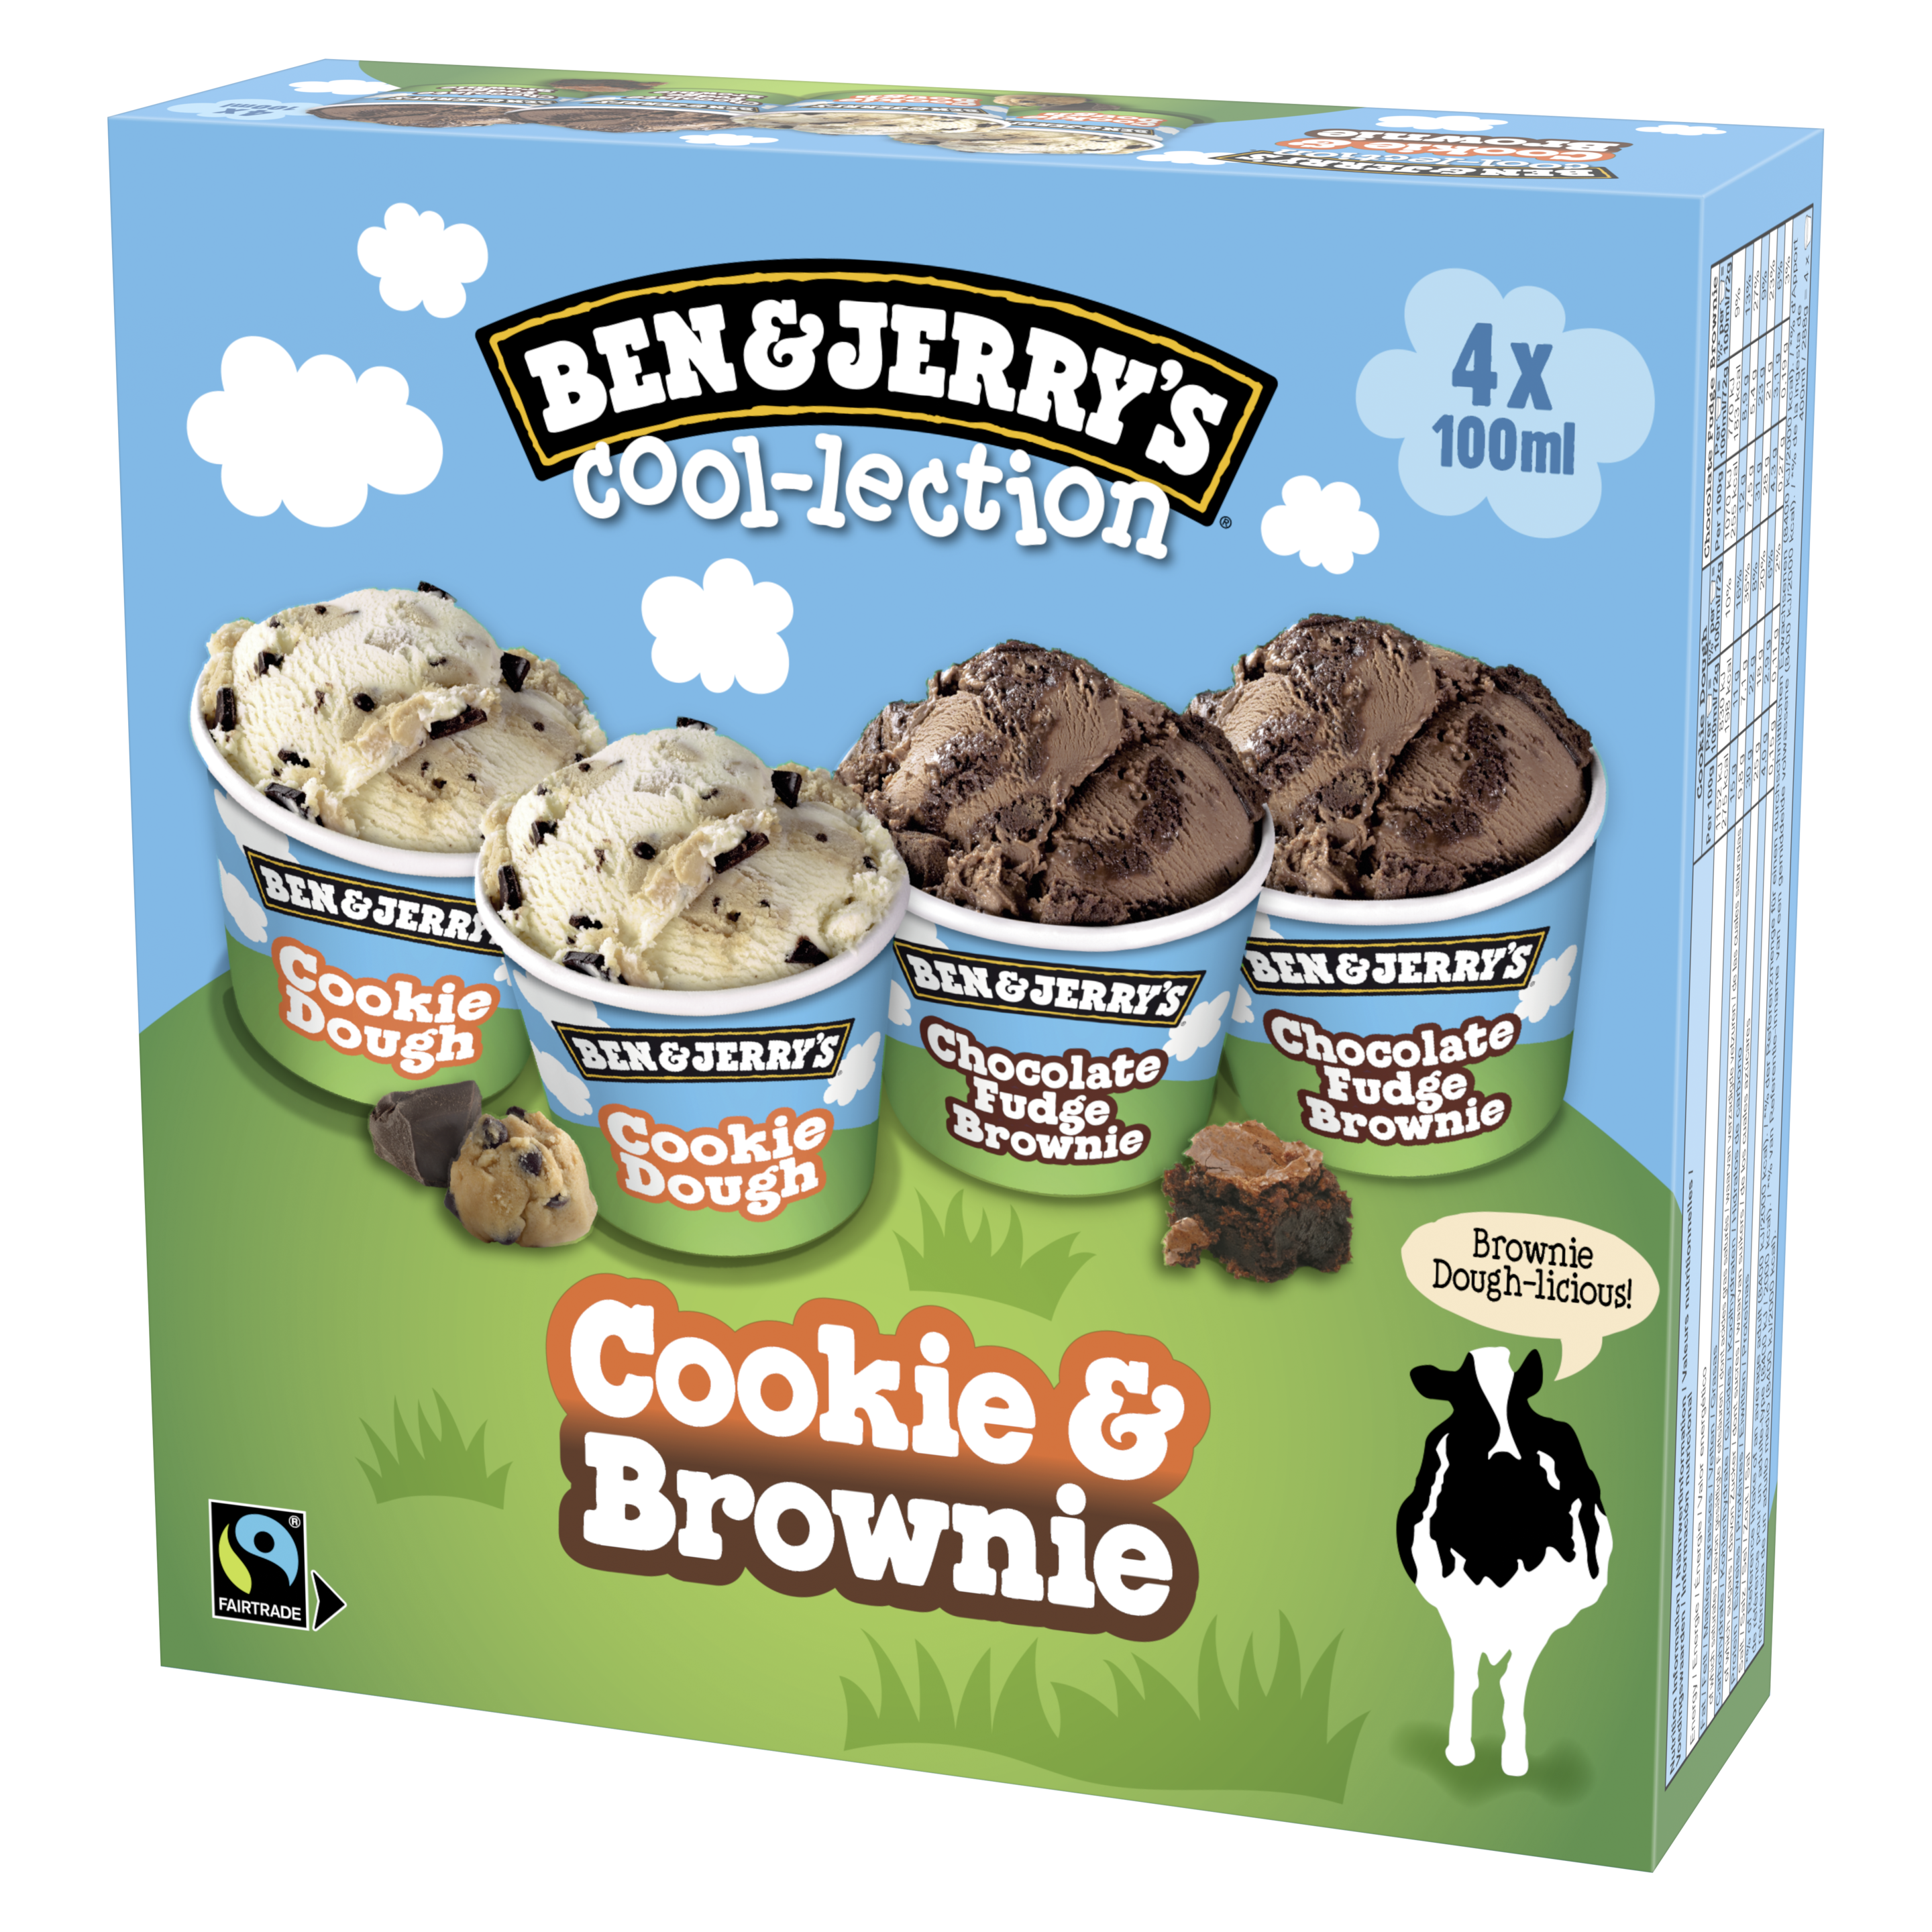 THE COOKIE & BROWNIE COOL-LECTION